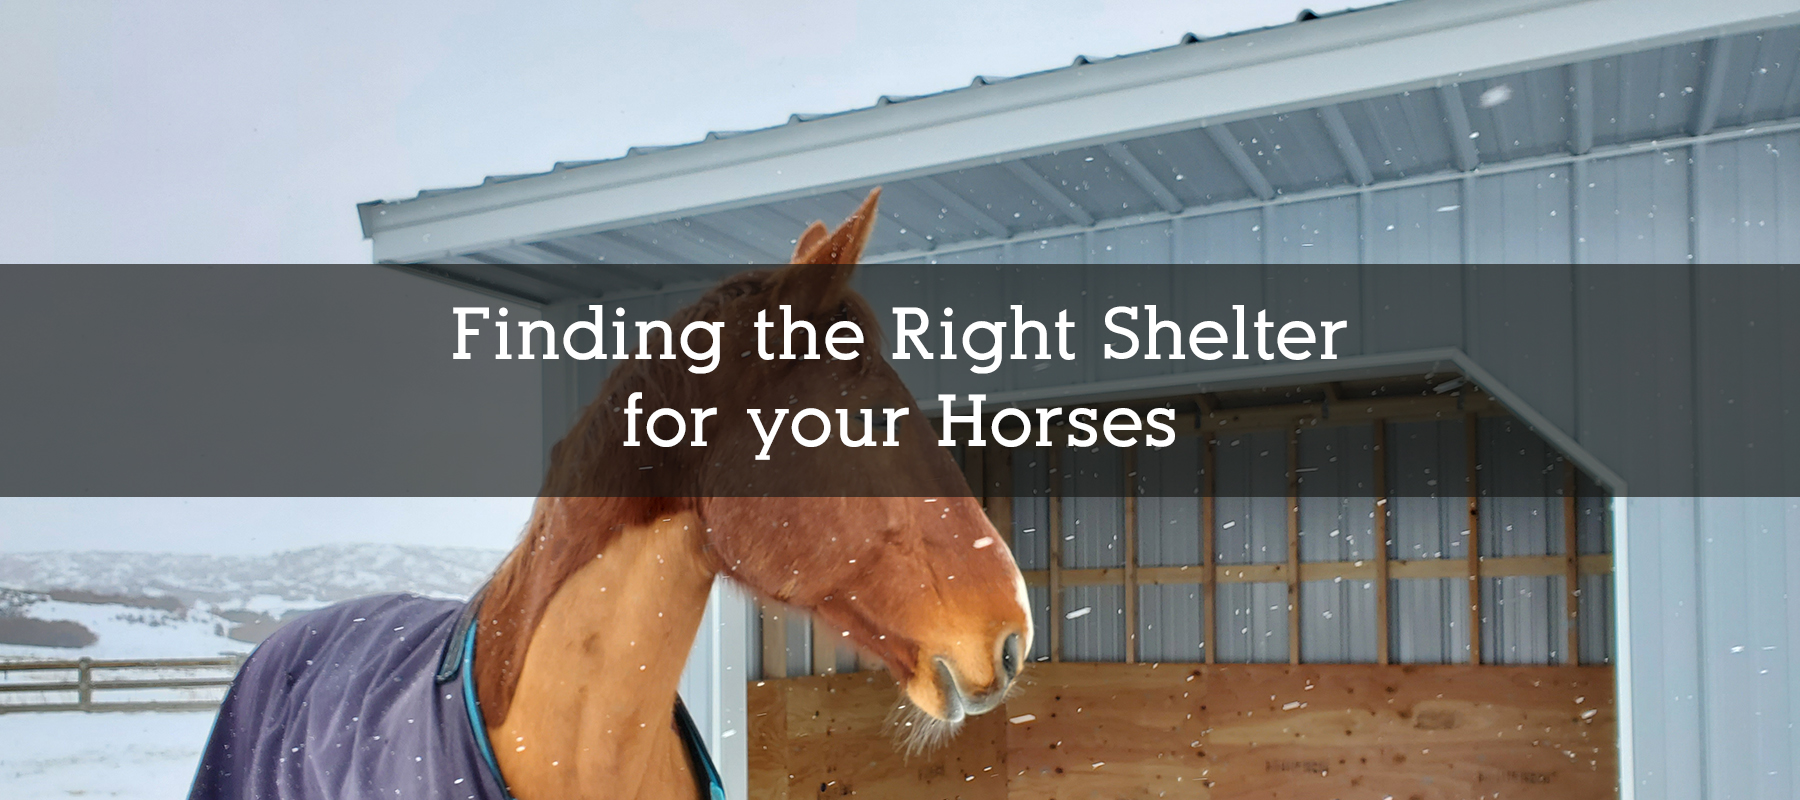 Finding the Right Shelter for your Horse